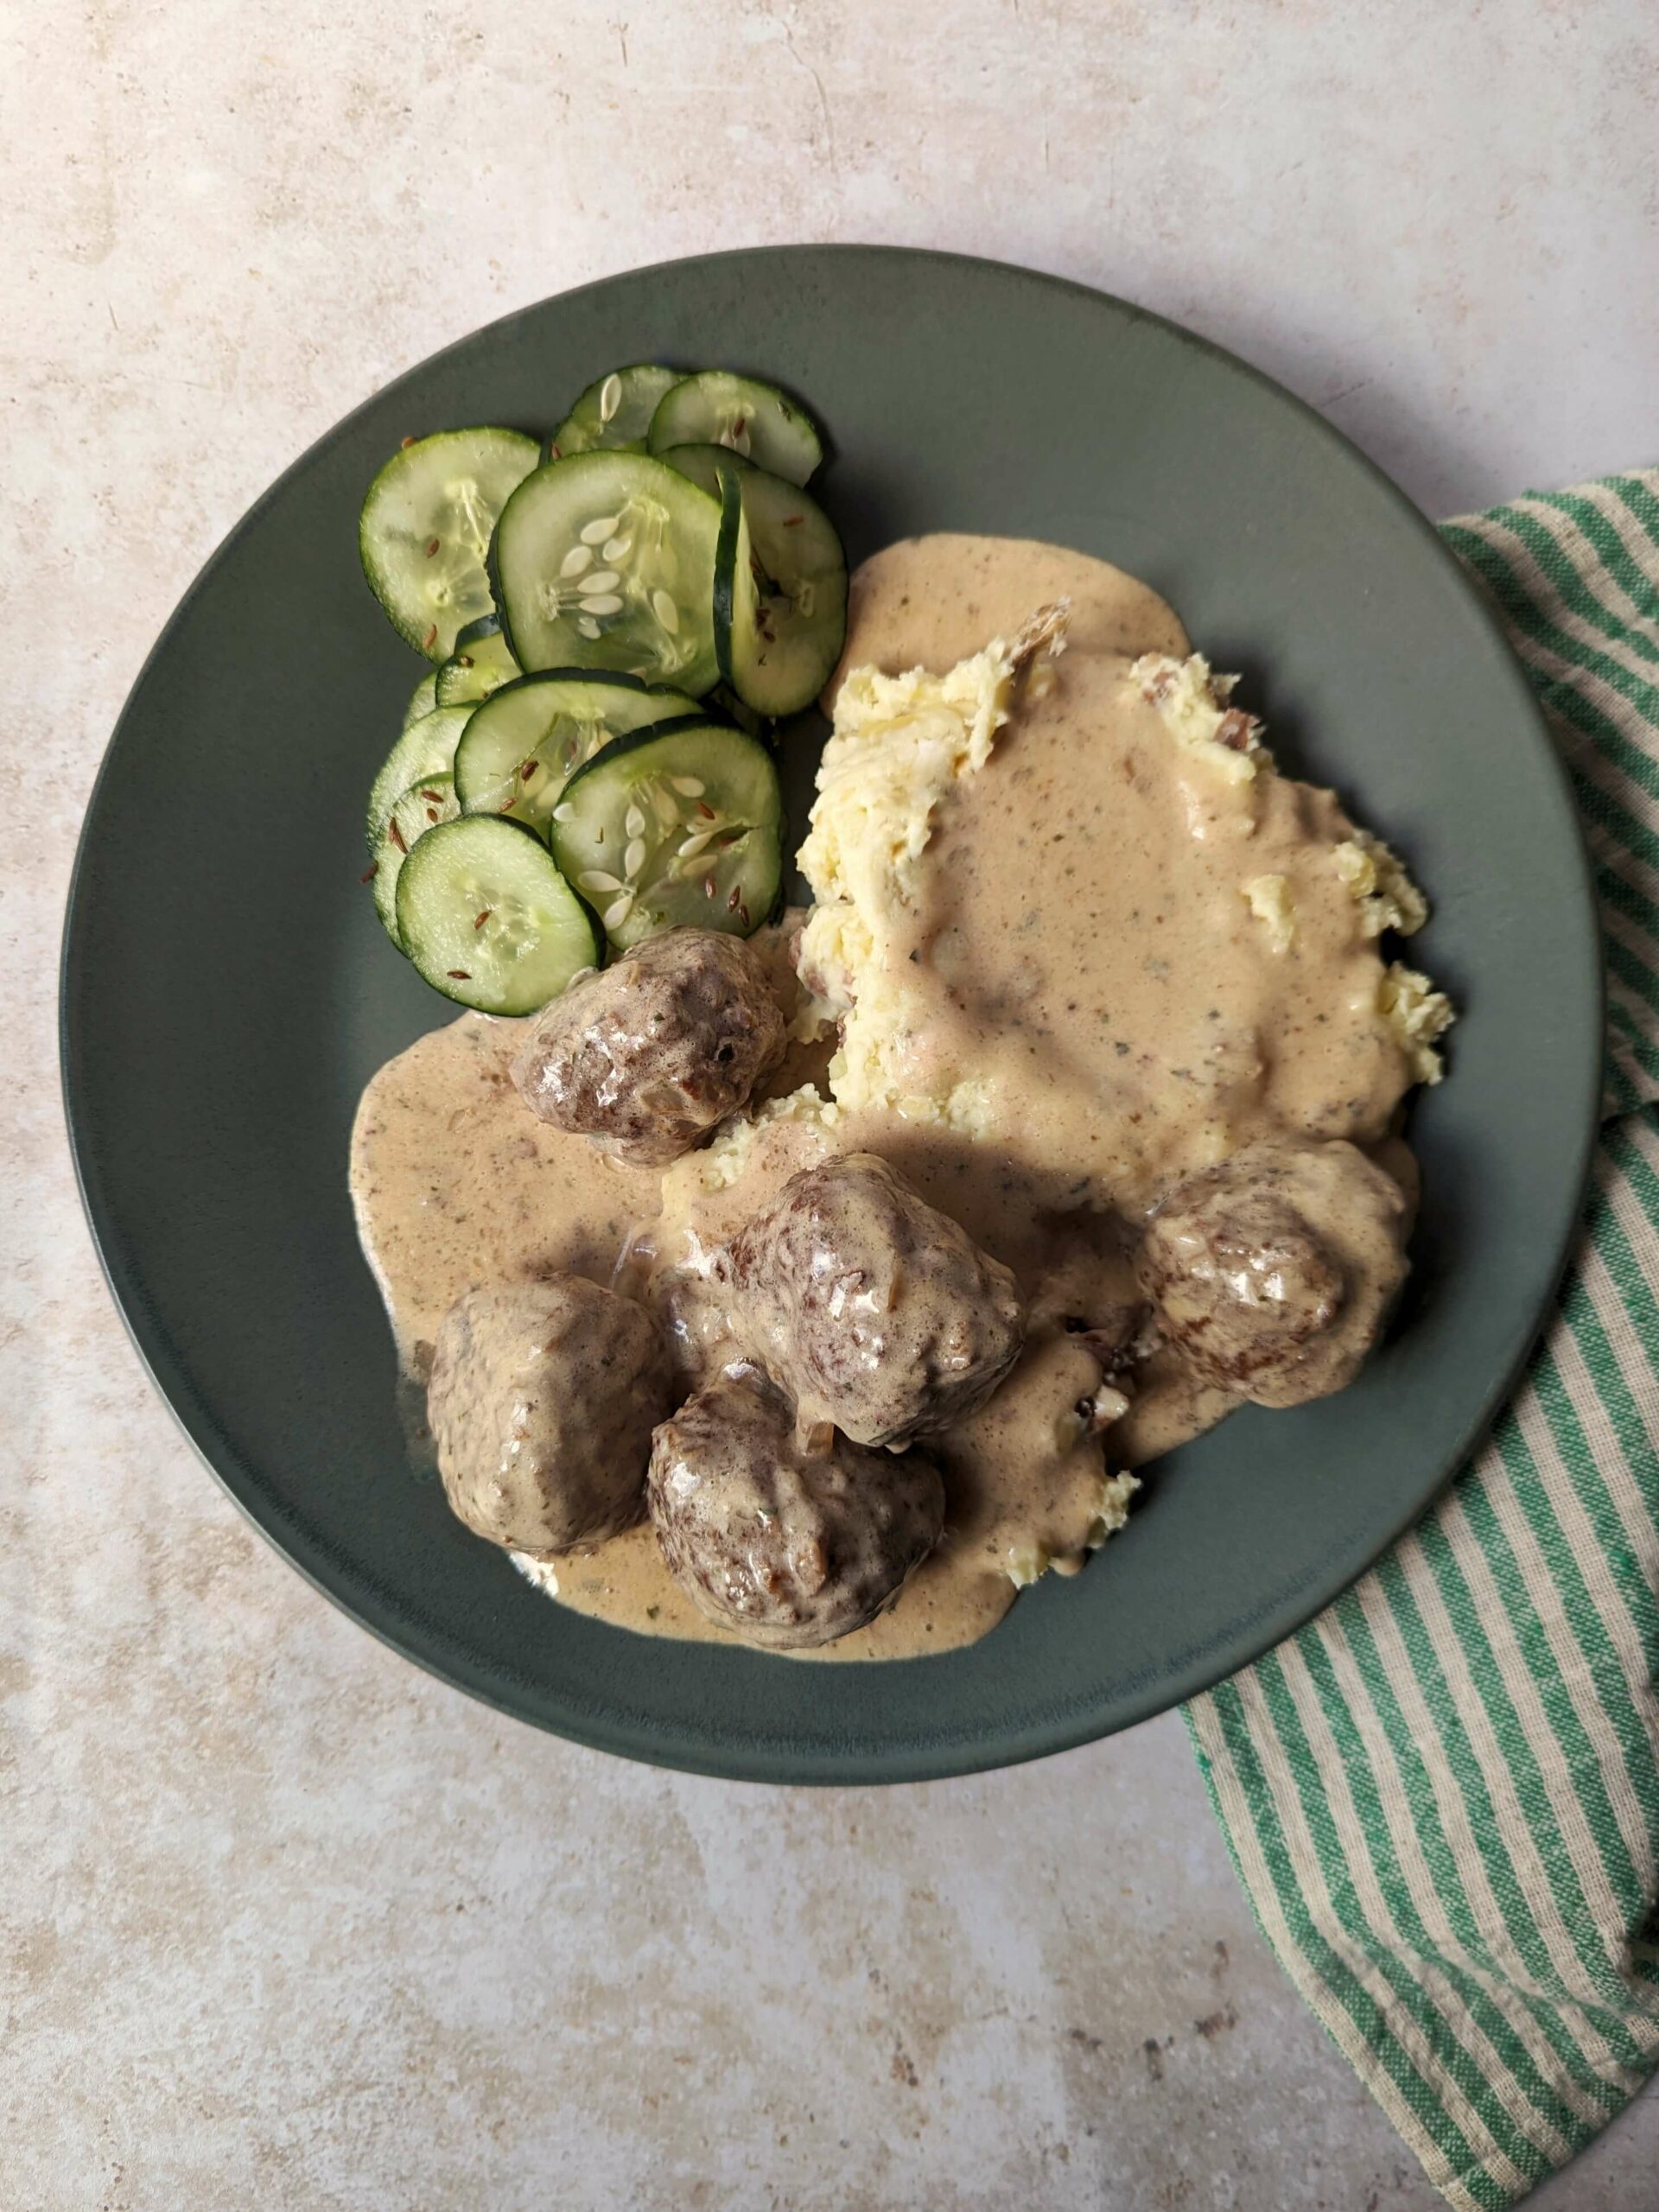 Our IKEA Swedish Meatballs Recipe served with cucumber salad and mashed potatoes.